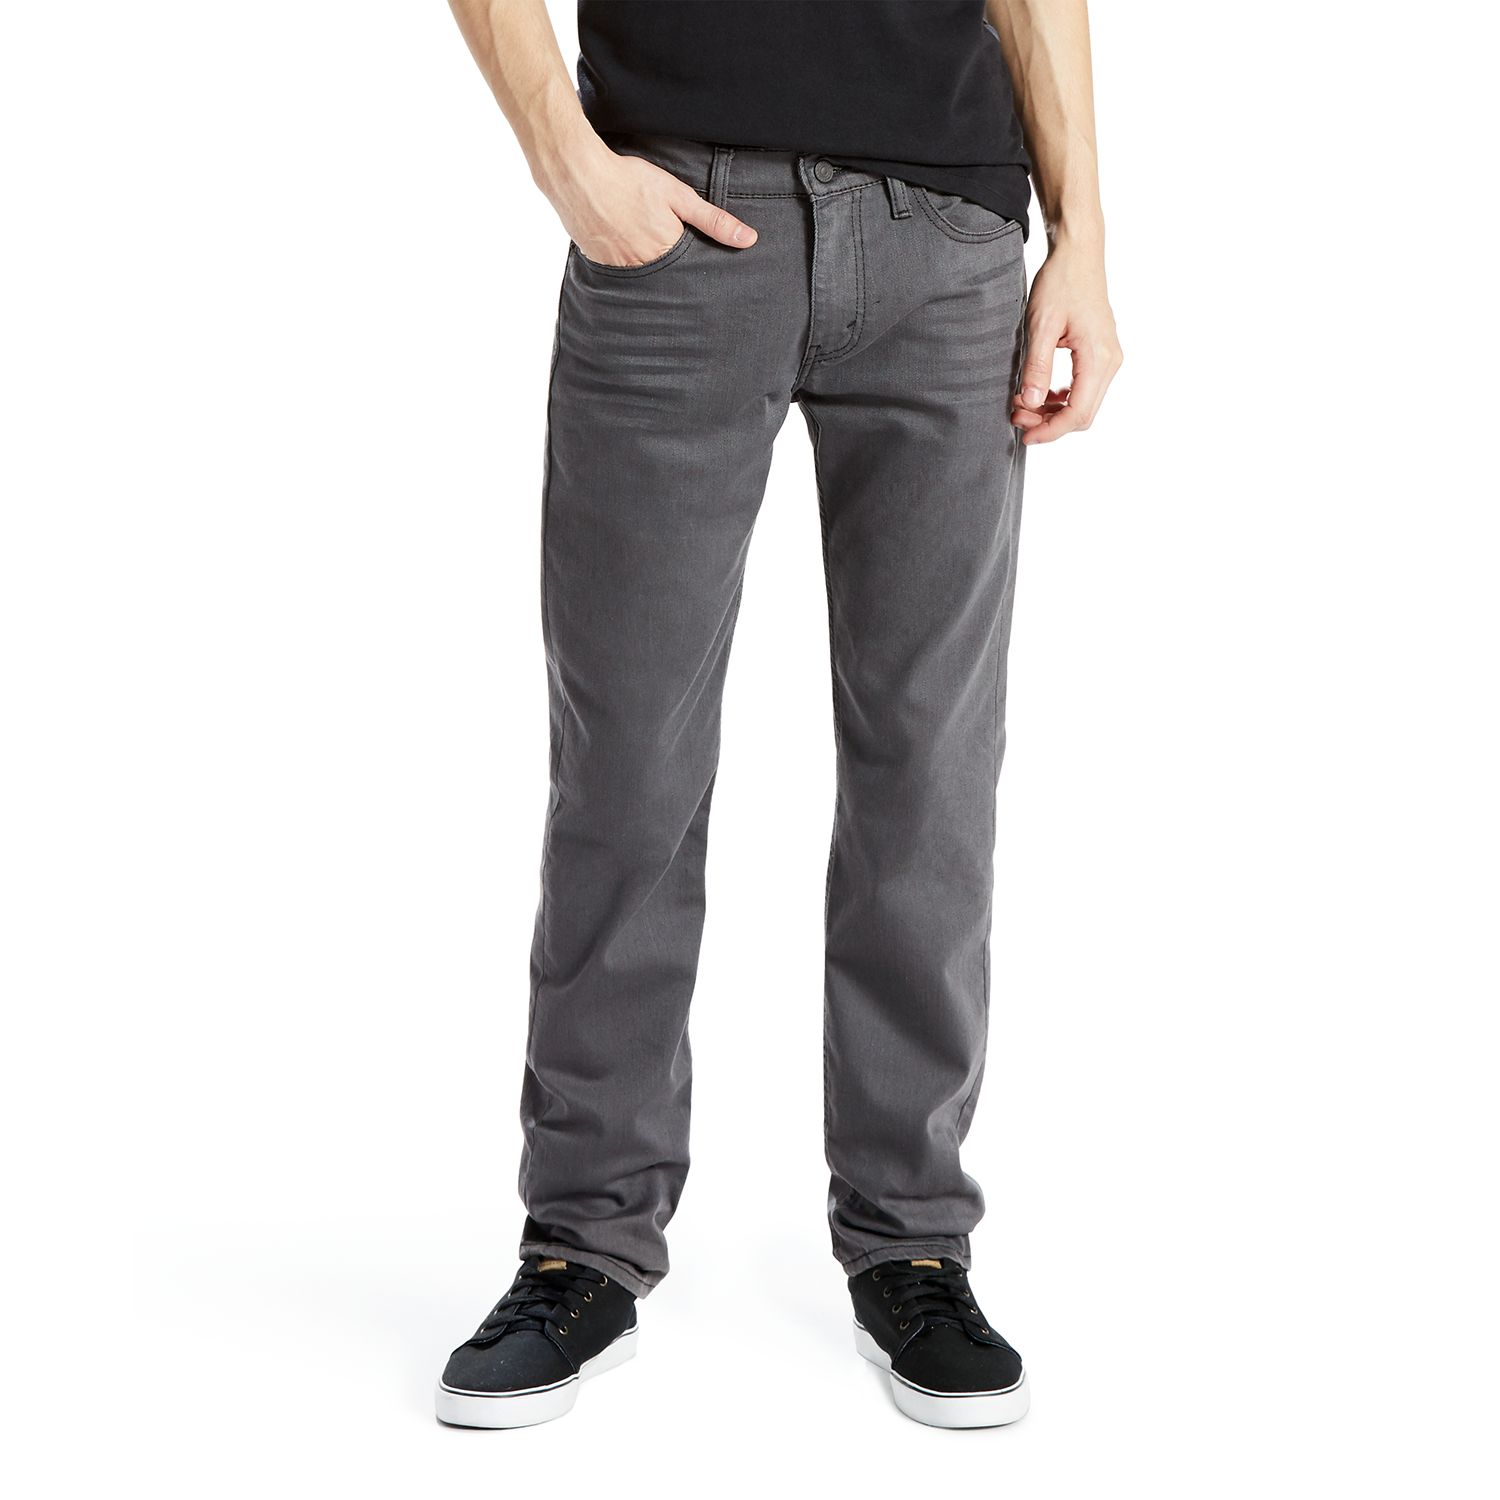 Image for Levi's Men's 511™ Slim-Fit Stretch Water Conscious Jeans at Kohl's.